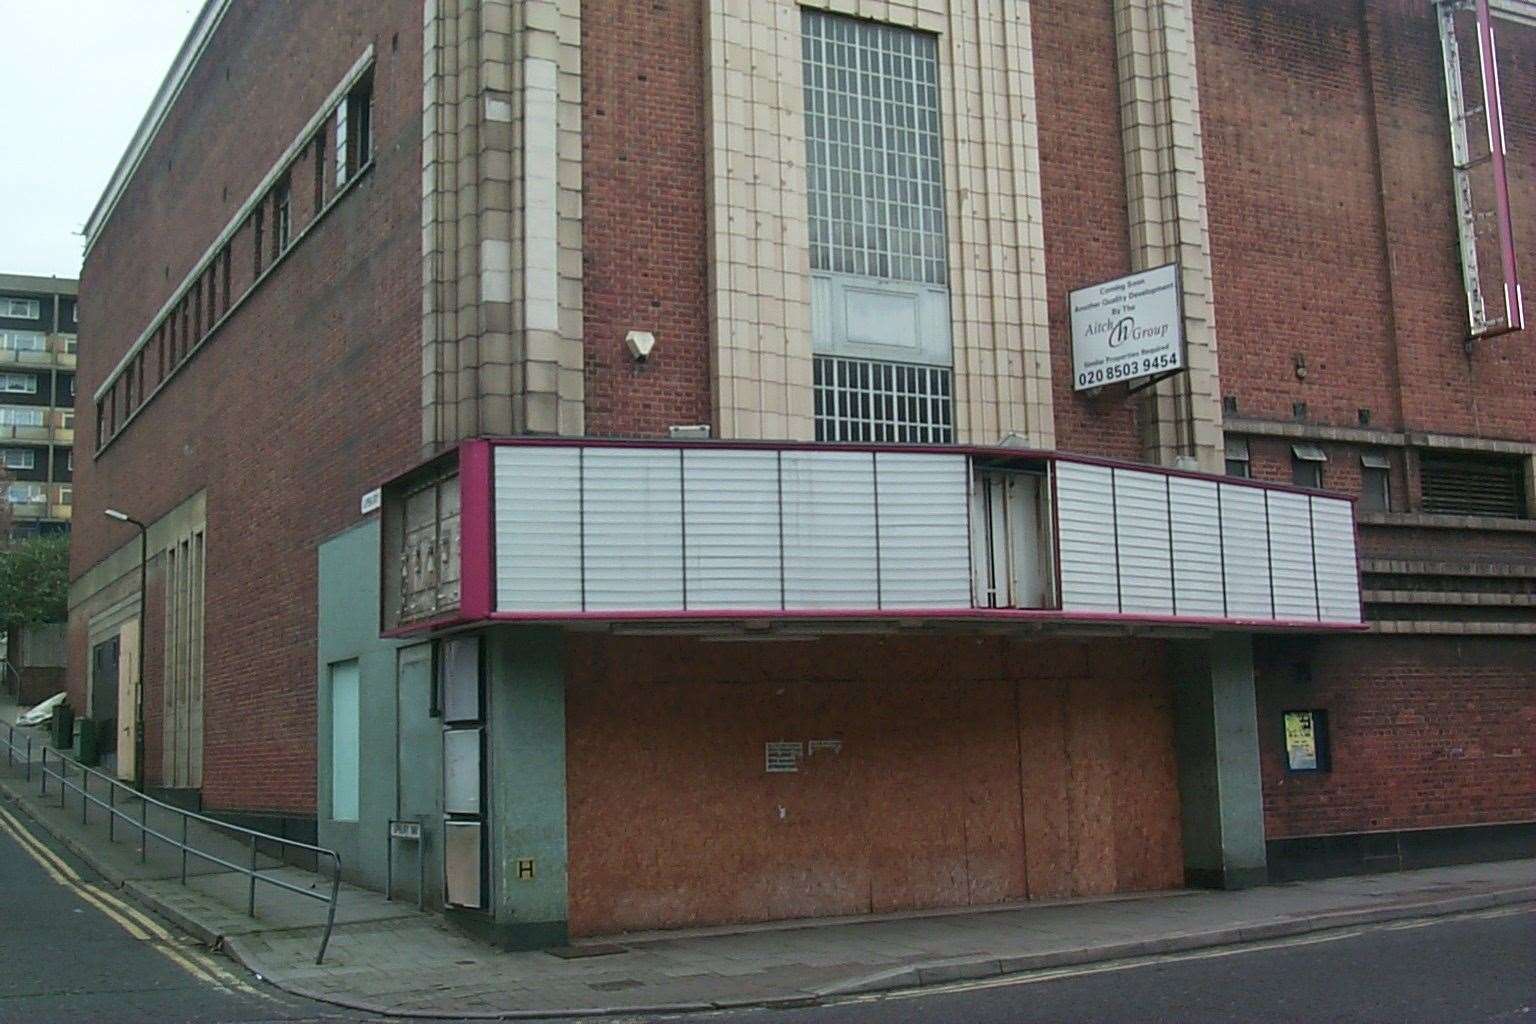 The former ABC Cinema, opposite the Gala bingo hall, closed in 2002